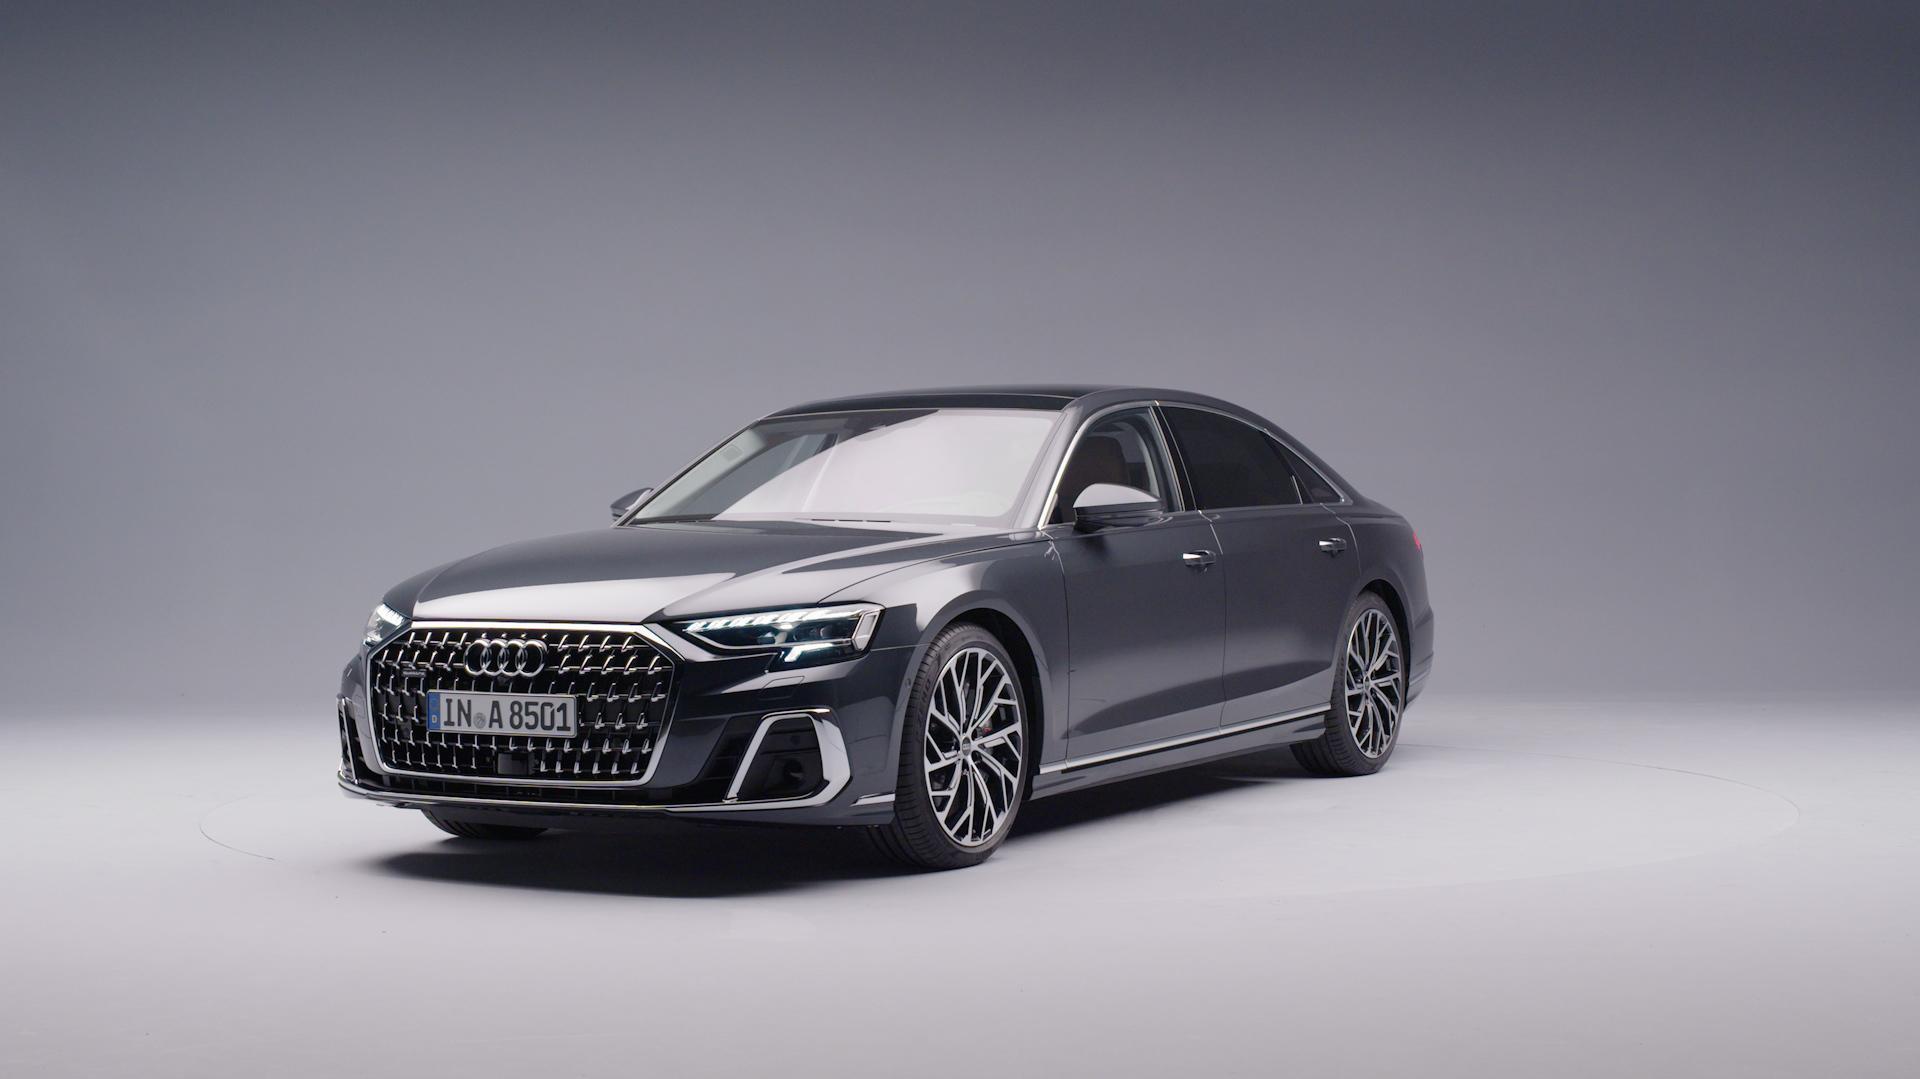 The Reveal Of New Audi A8 L Video Mediacenter